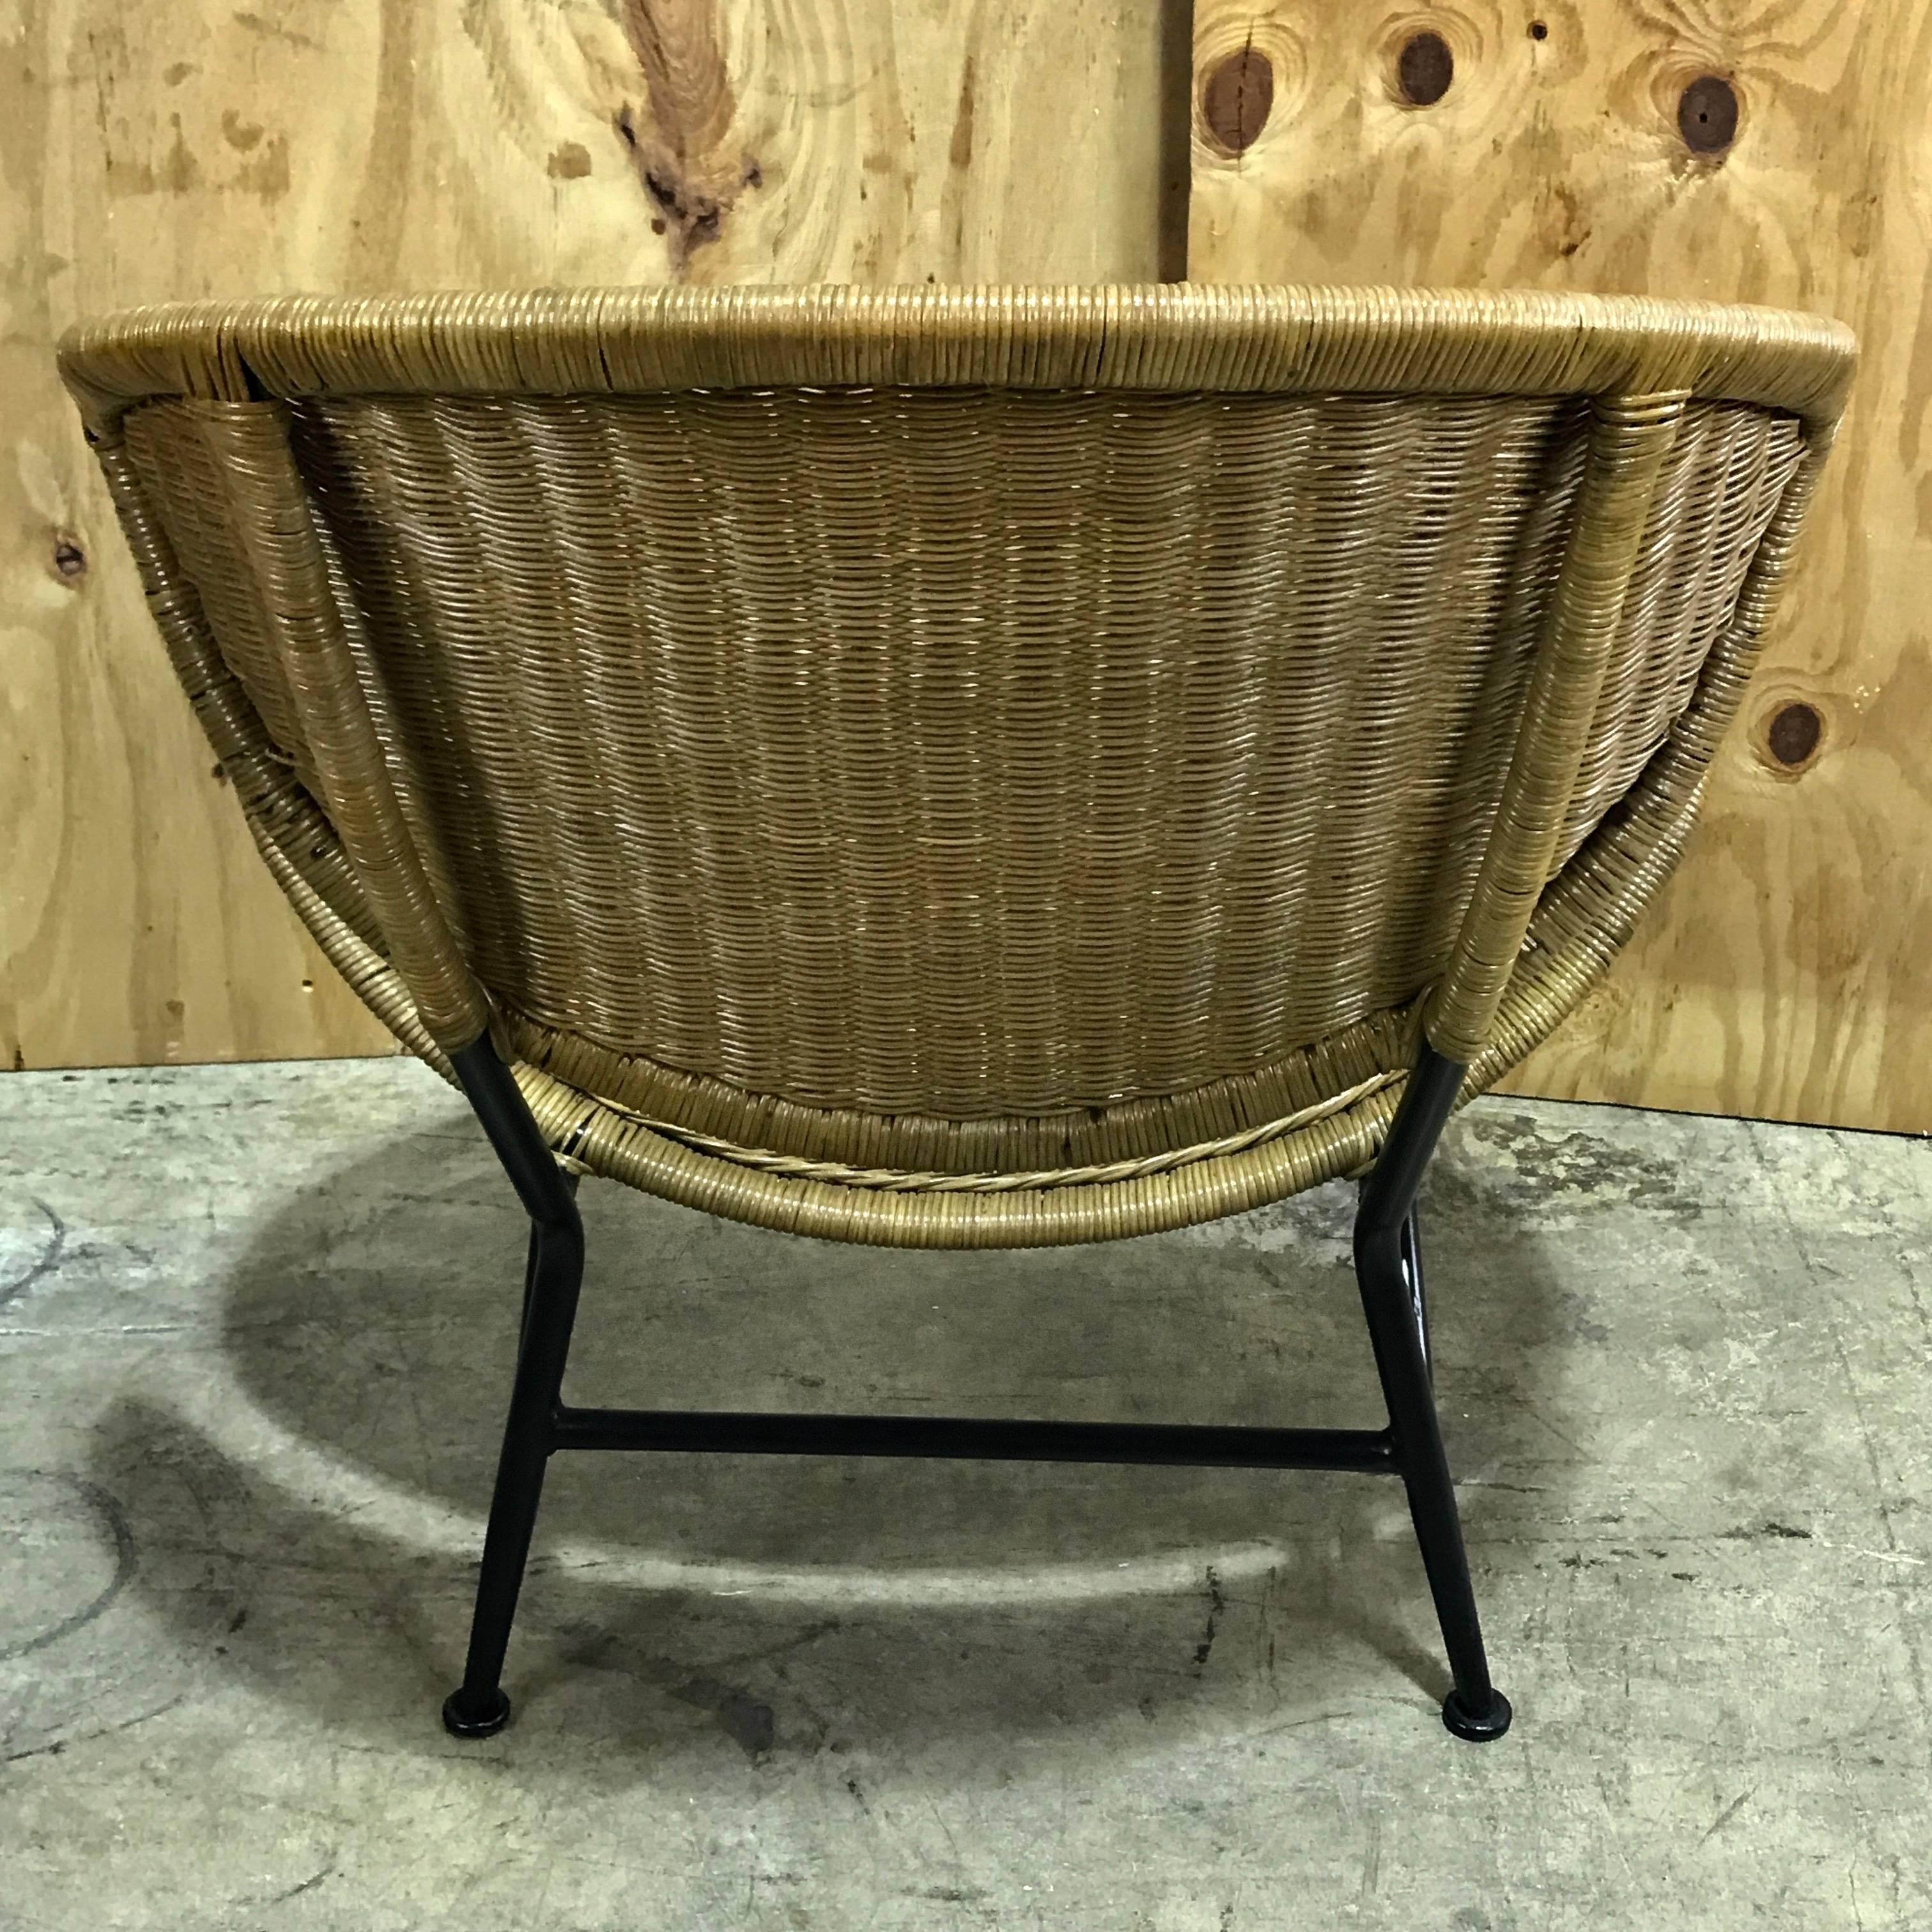 20th Century Pair of Midcentury Crescent Shaped Wicker Lounge Chairs, Restored